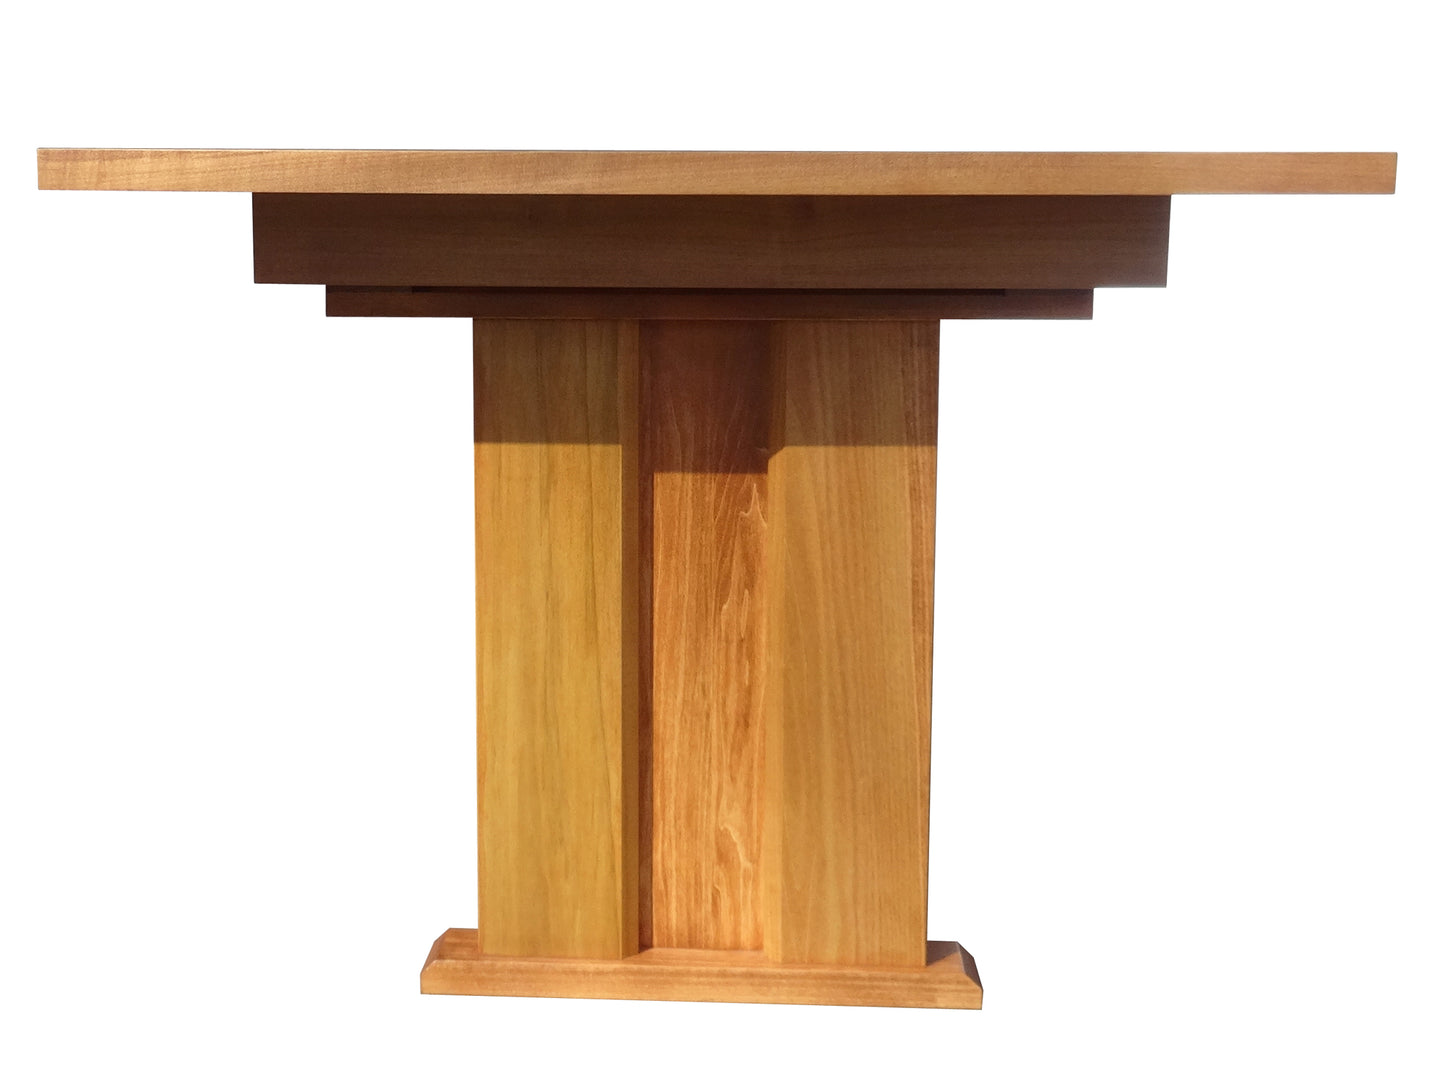 Vancouver Trestle Table - solid wood, Canadian made, locally built, custom, in-house design